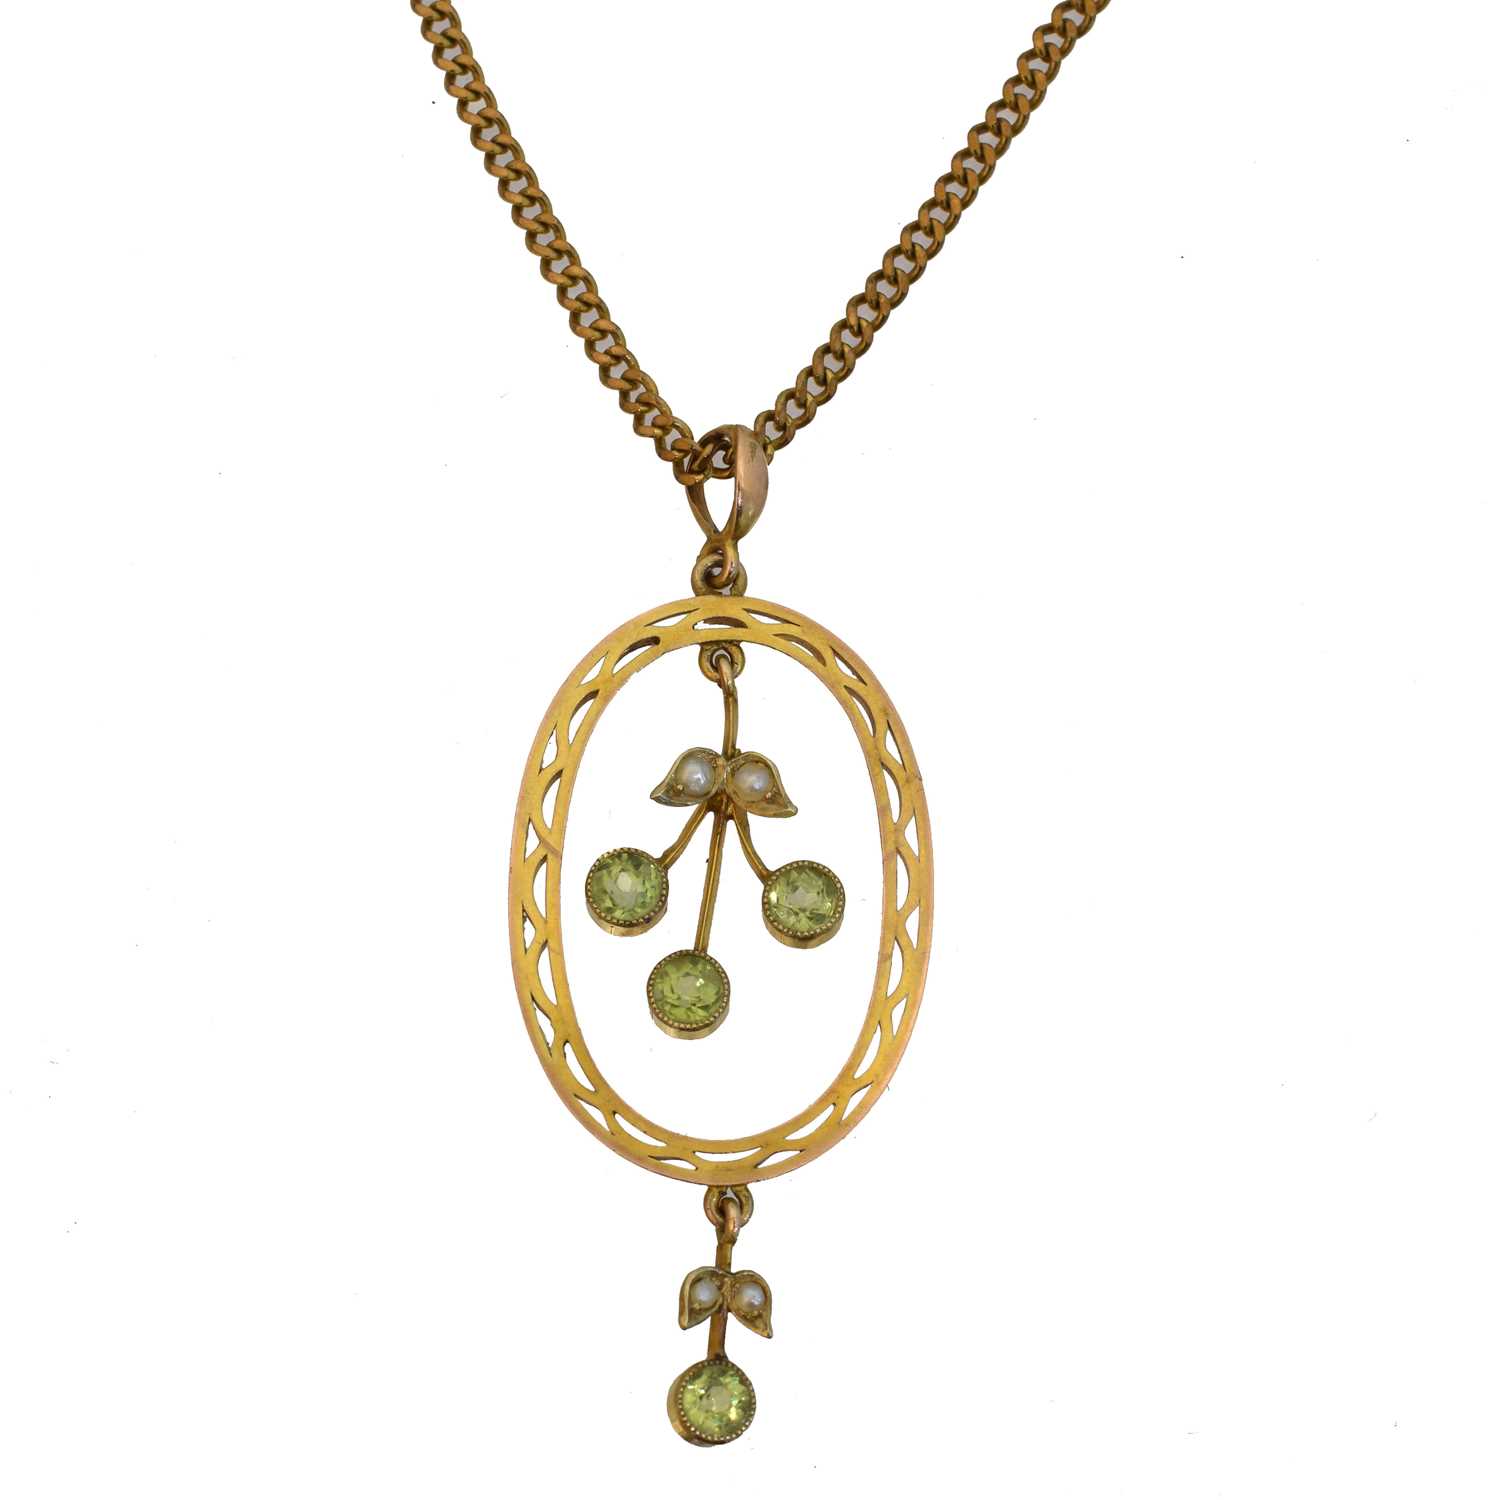 Lot 72 - An early 20th century peridot and split pearl pendant.